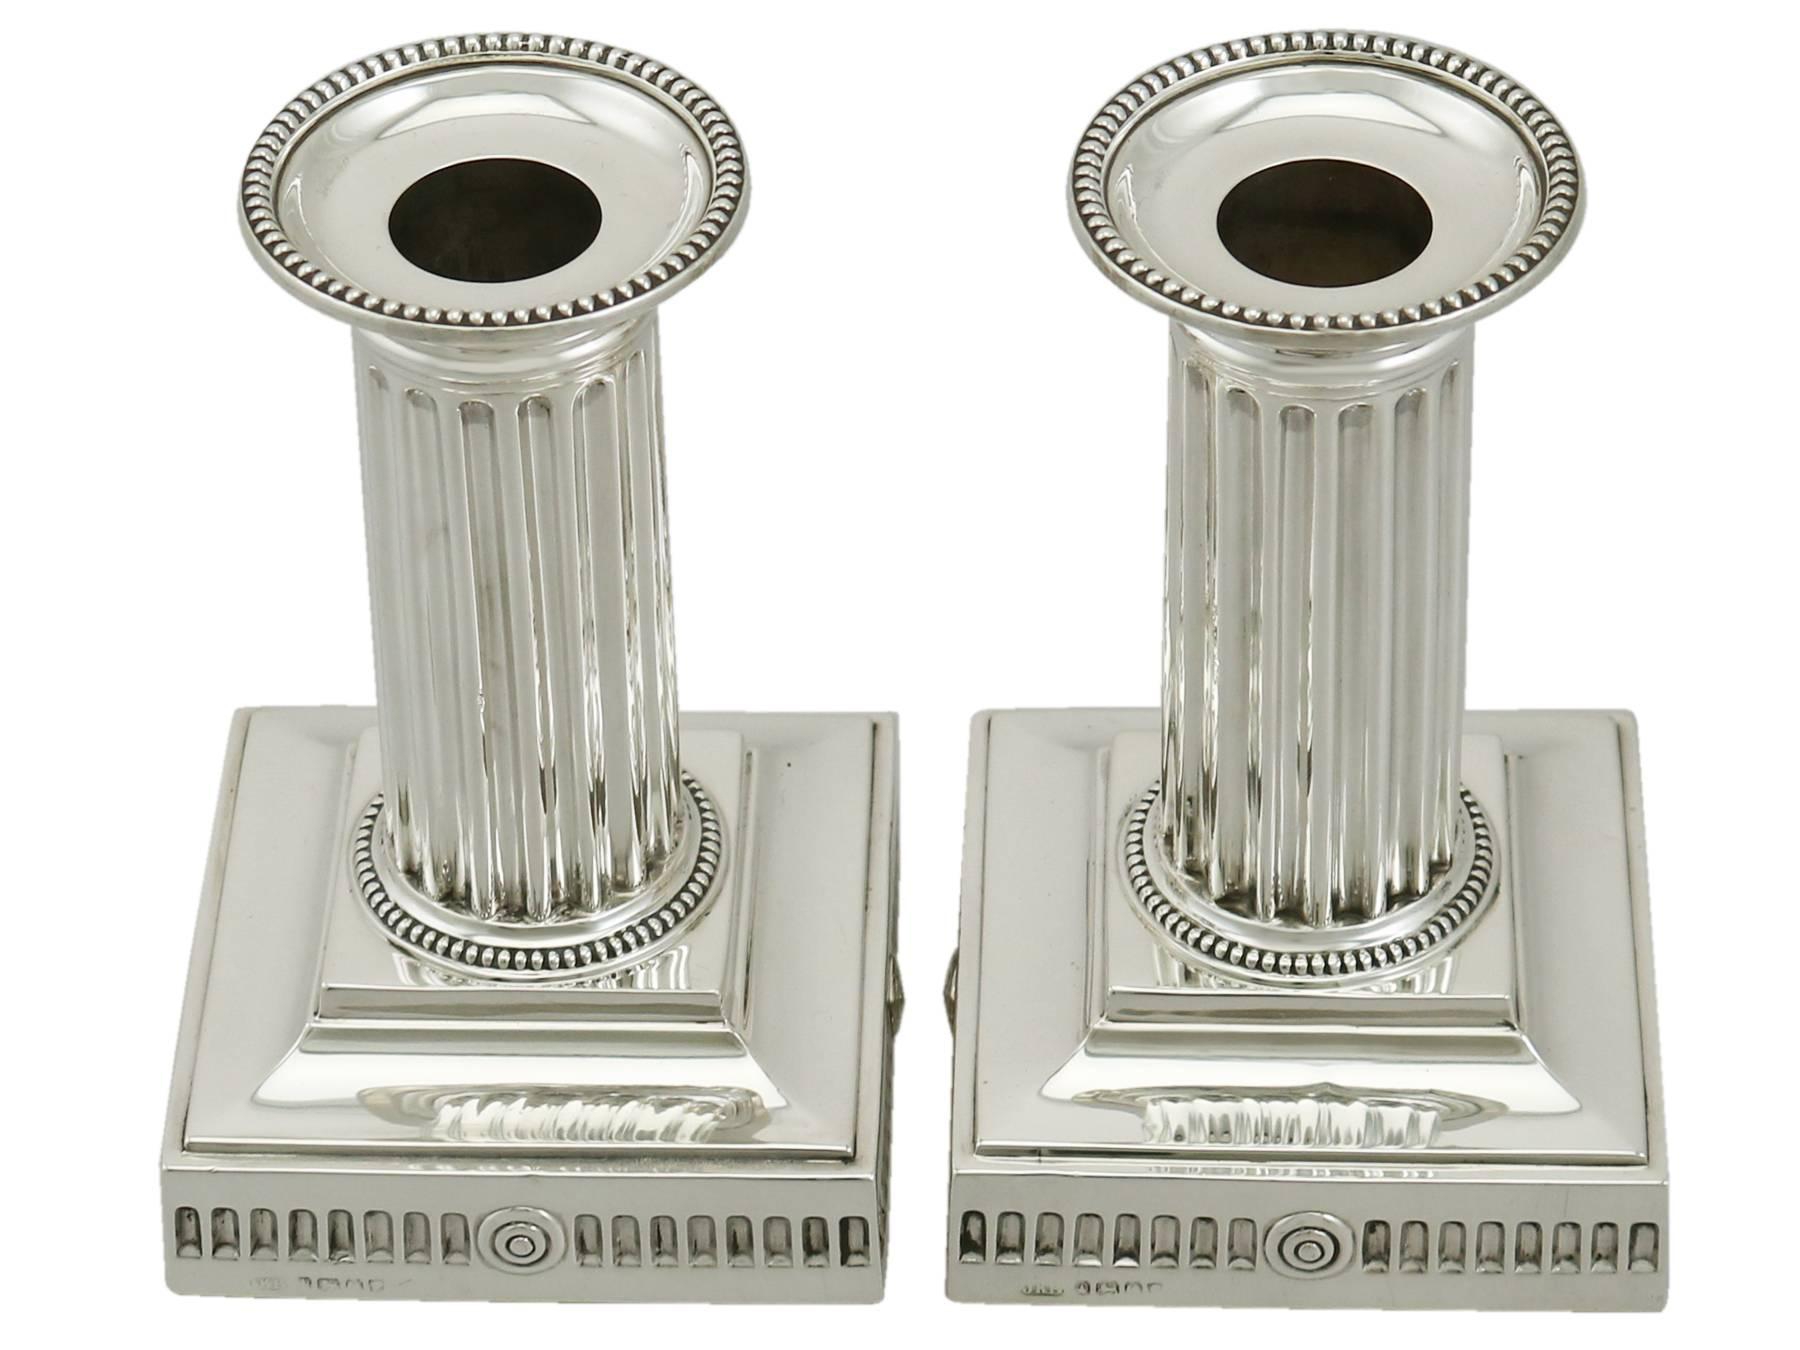 A fine and impressive pair of antique Victorian English sterling silver Corinthian column piano candlesticks; part of our ornamental silverware collection

These exceptional antique Victorian sterling silver candlesticks have Corinthian columns to